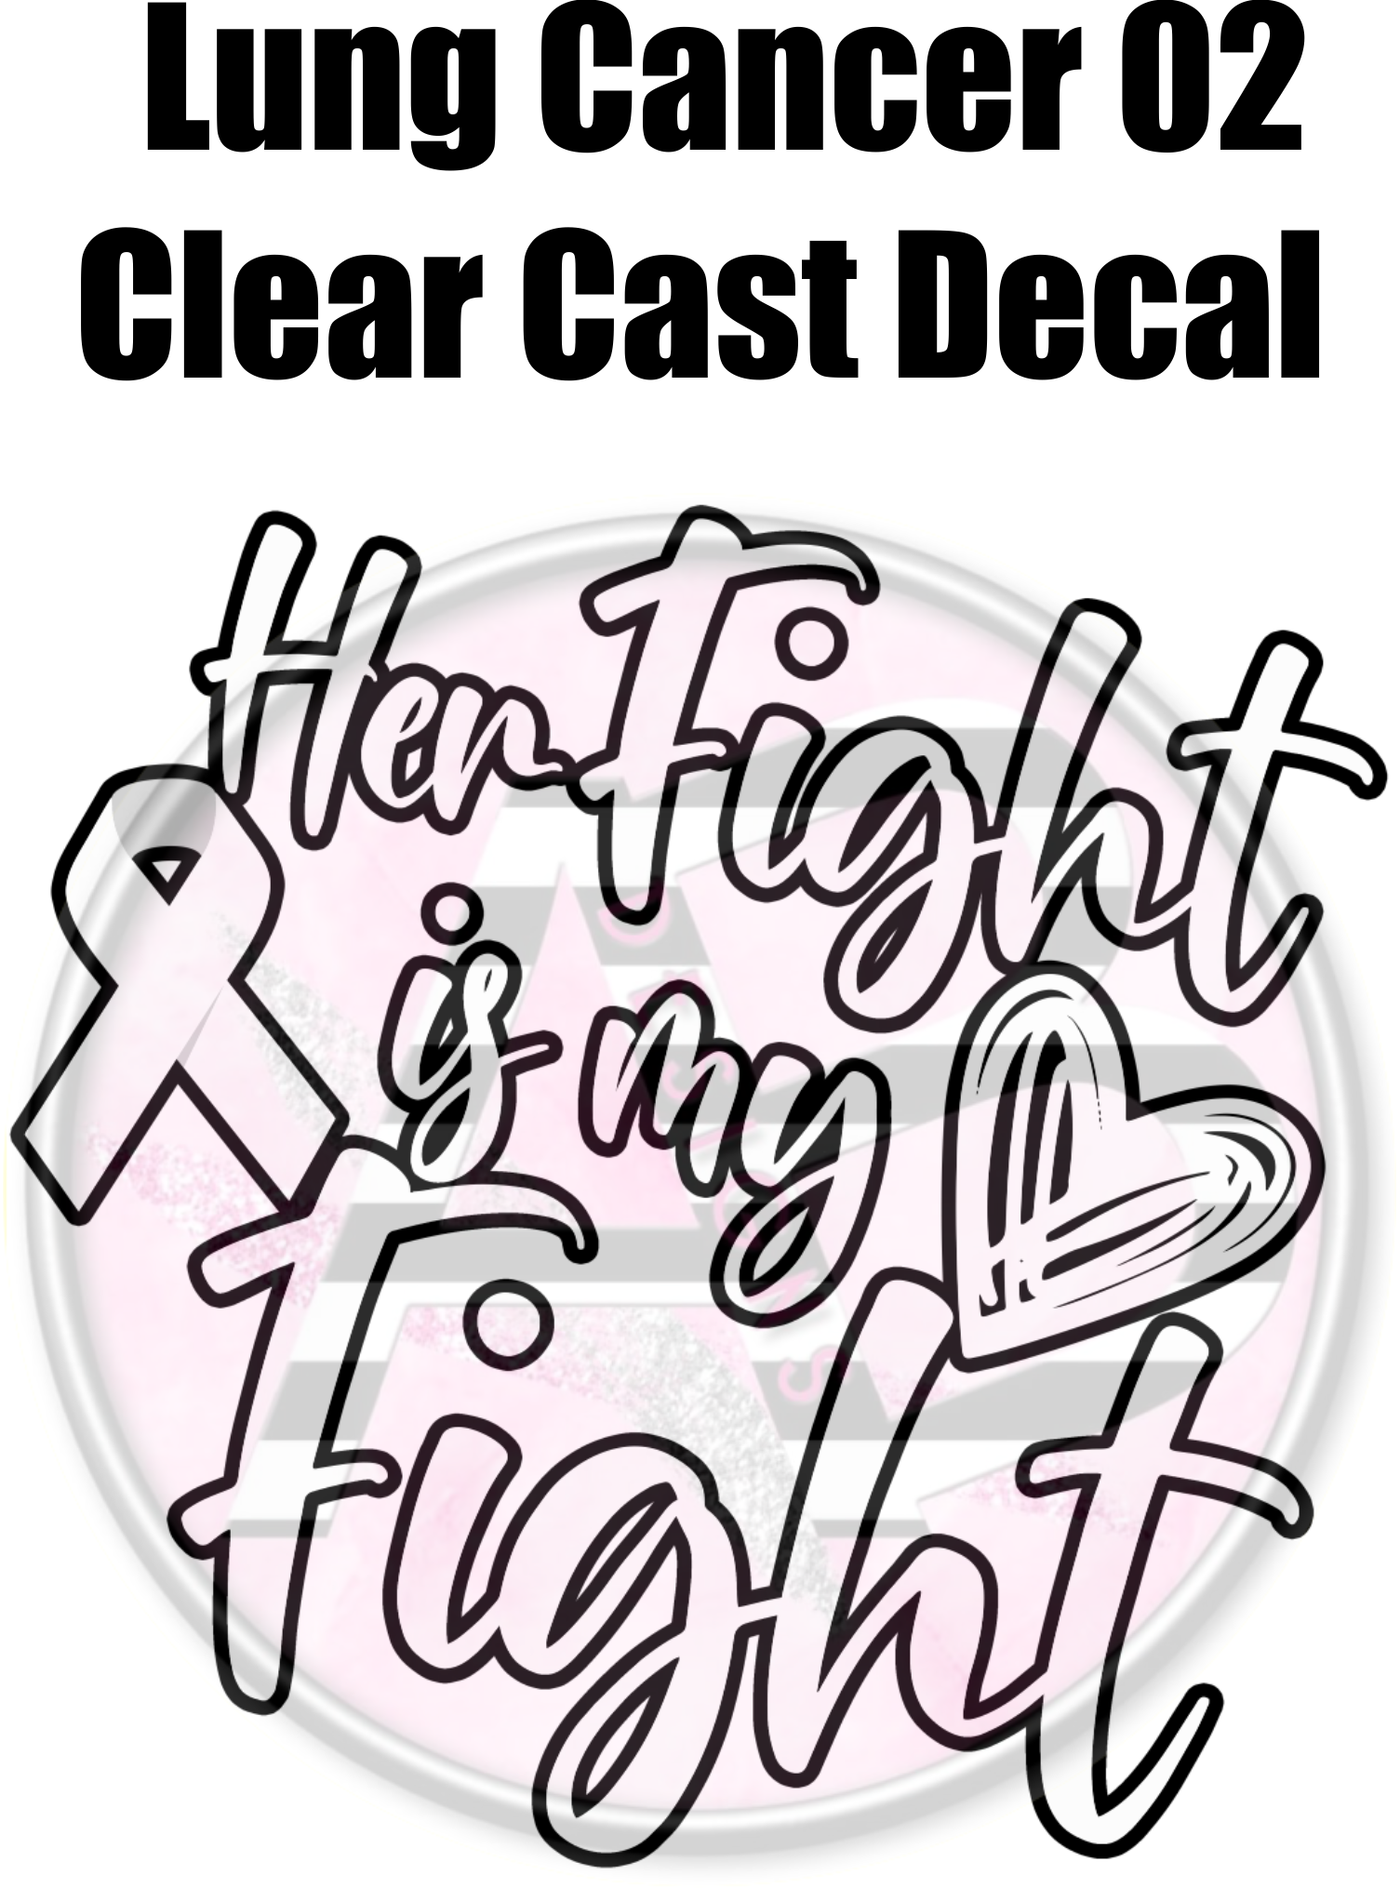 Lung Cancer 02 - Clear Cast Decal